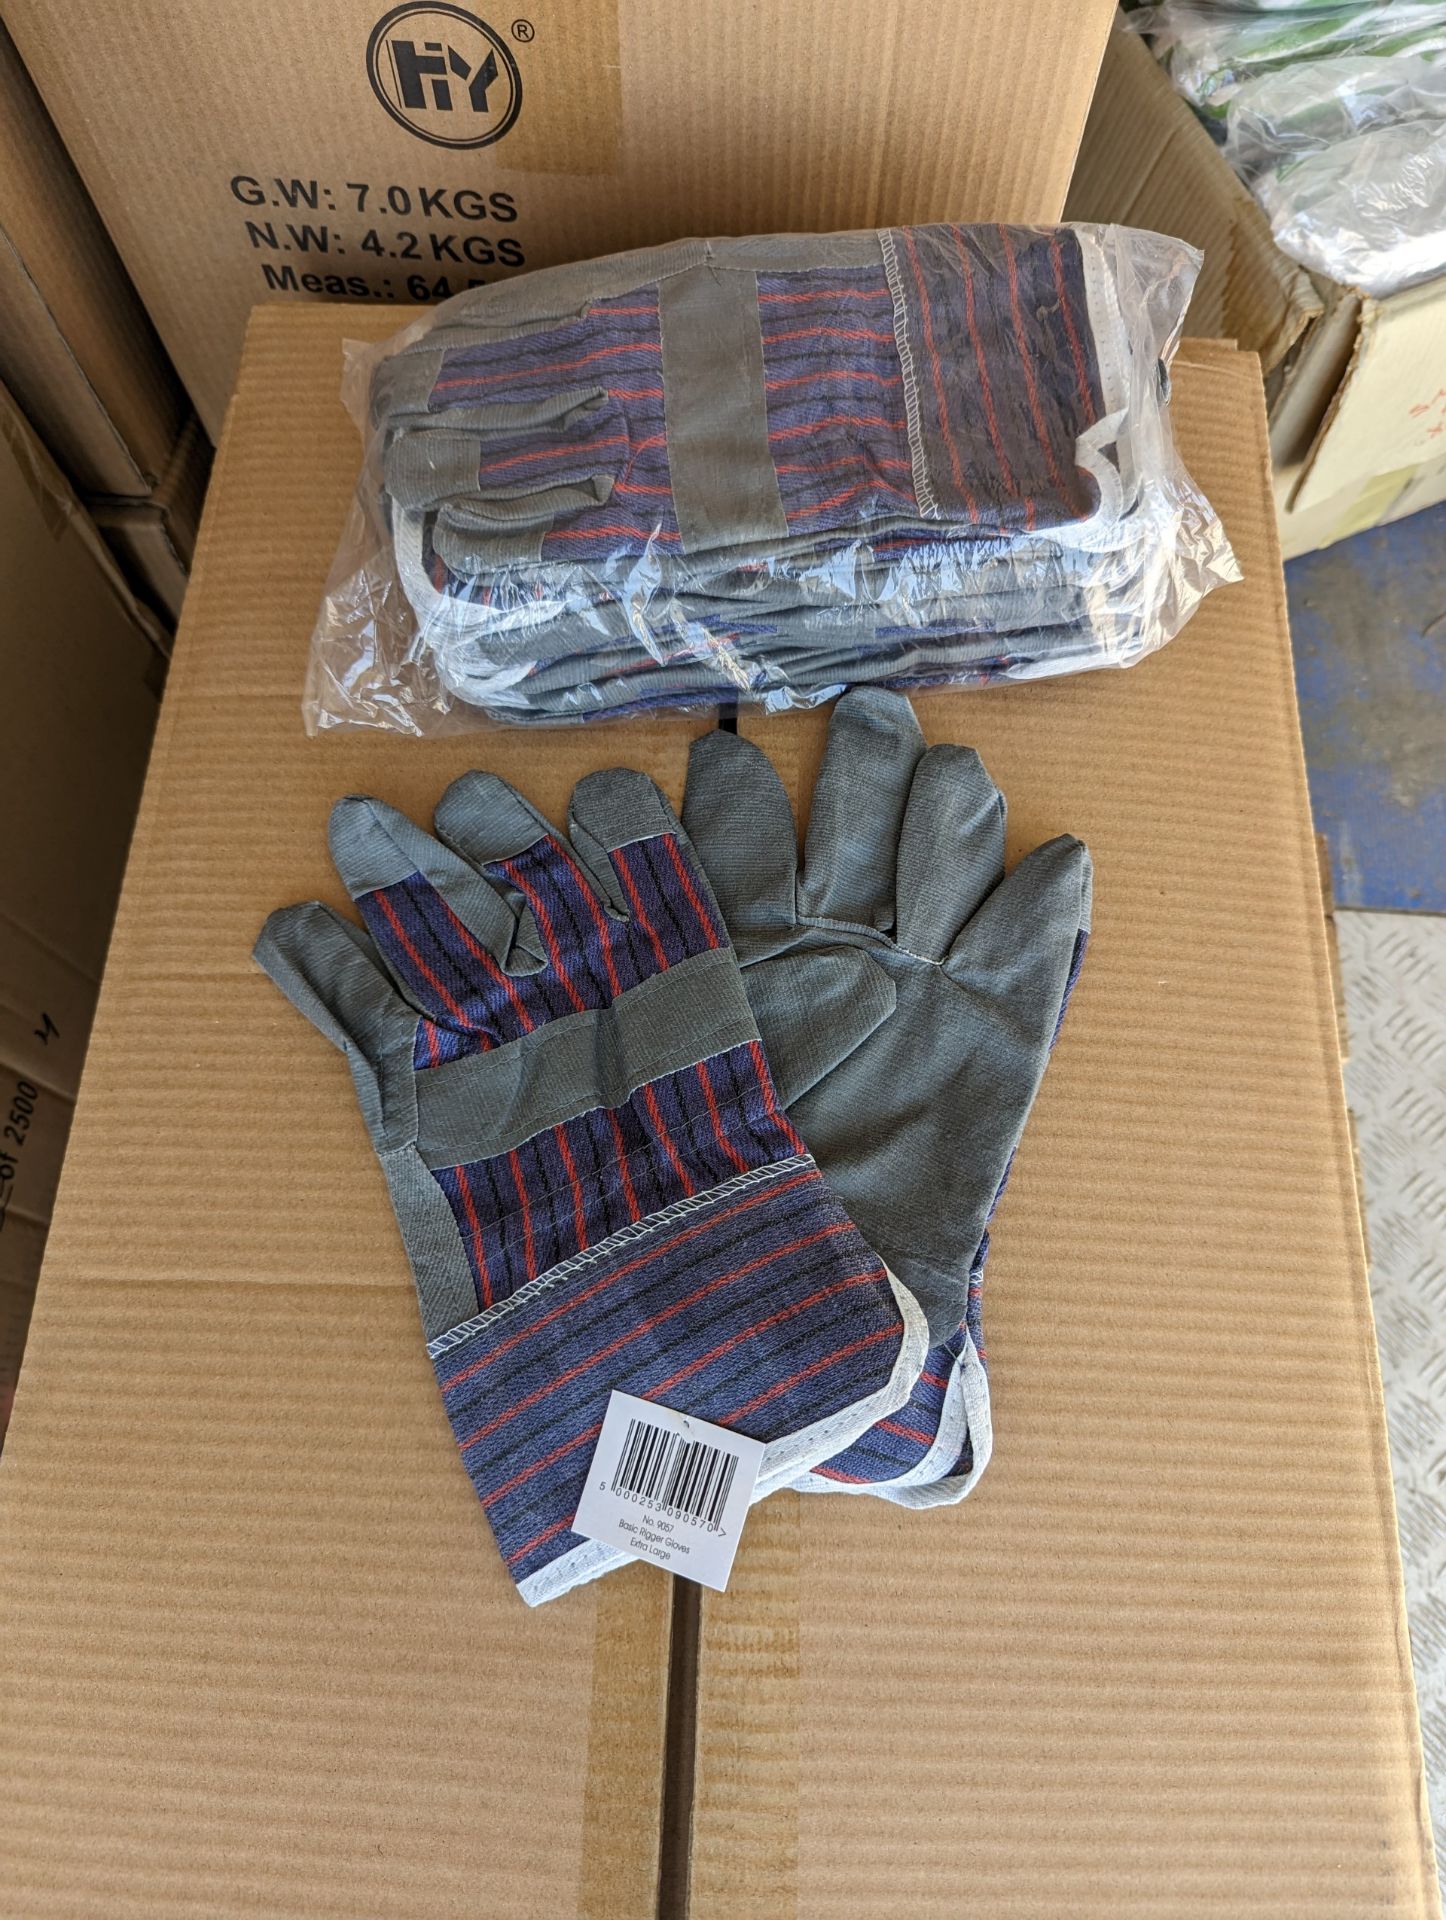 Riggers gloves 50 x pairs (XL) size - Image 3 of 3